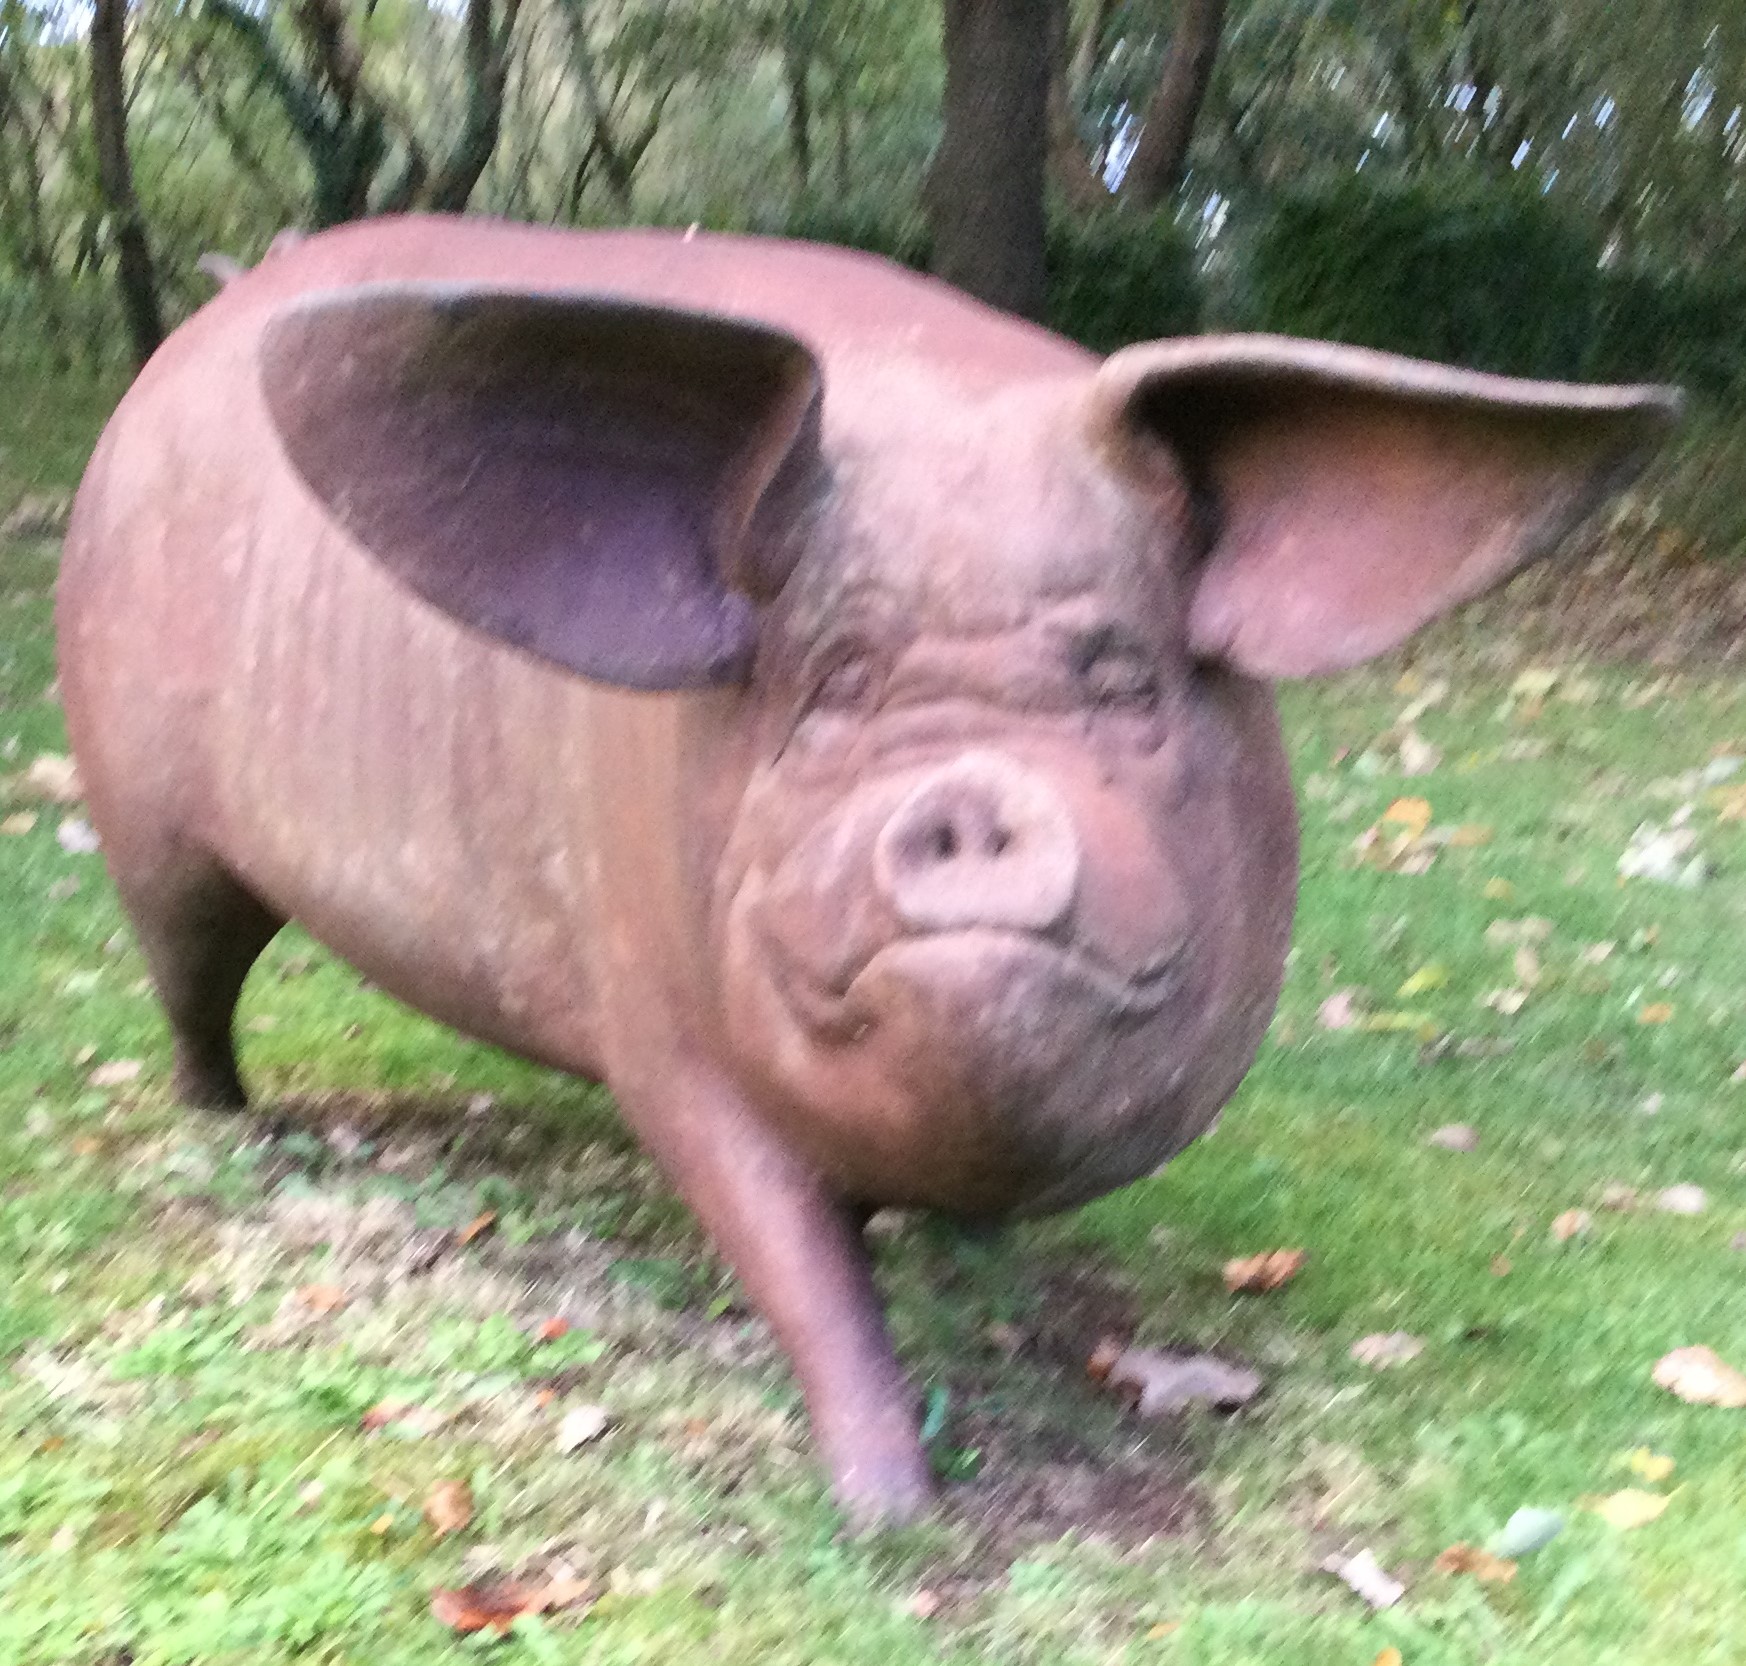 A massive garden ornament in the form of a pig with outstretched ears. - Image 2 of 3